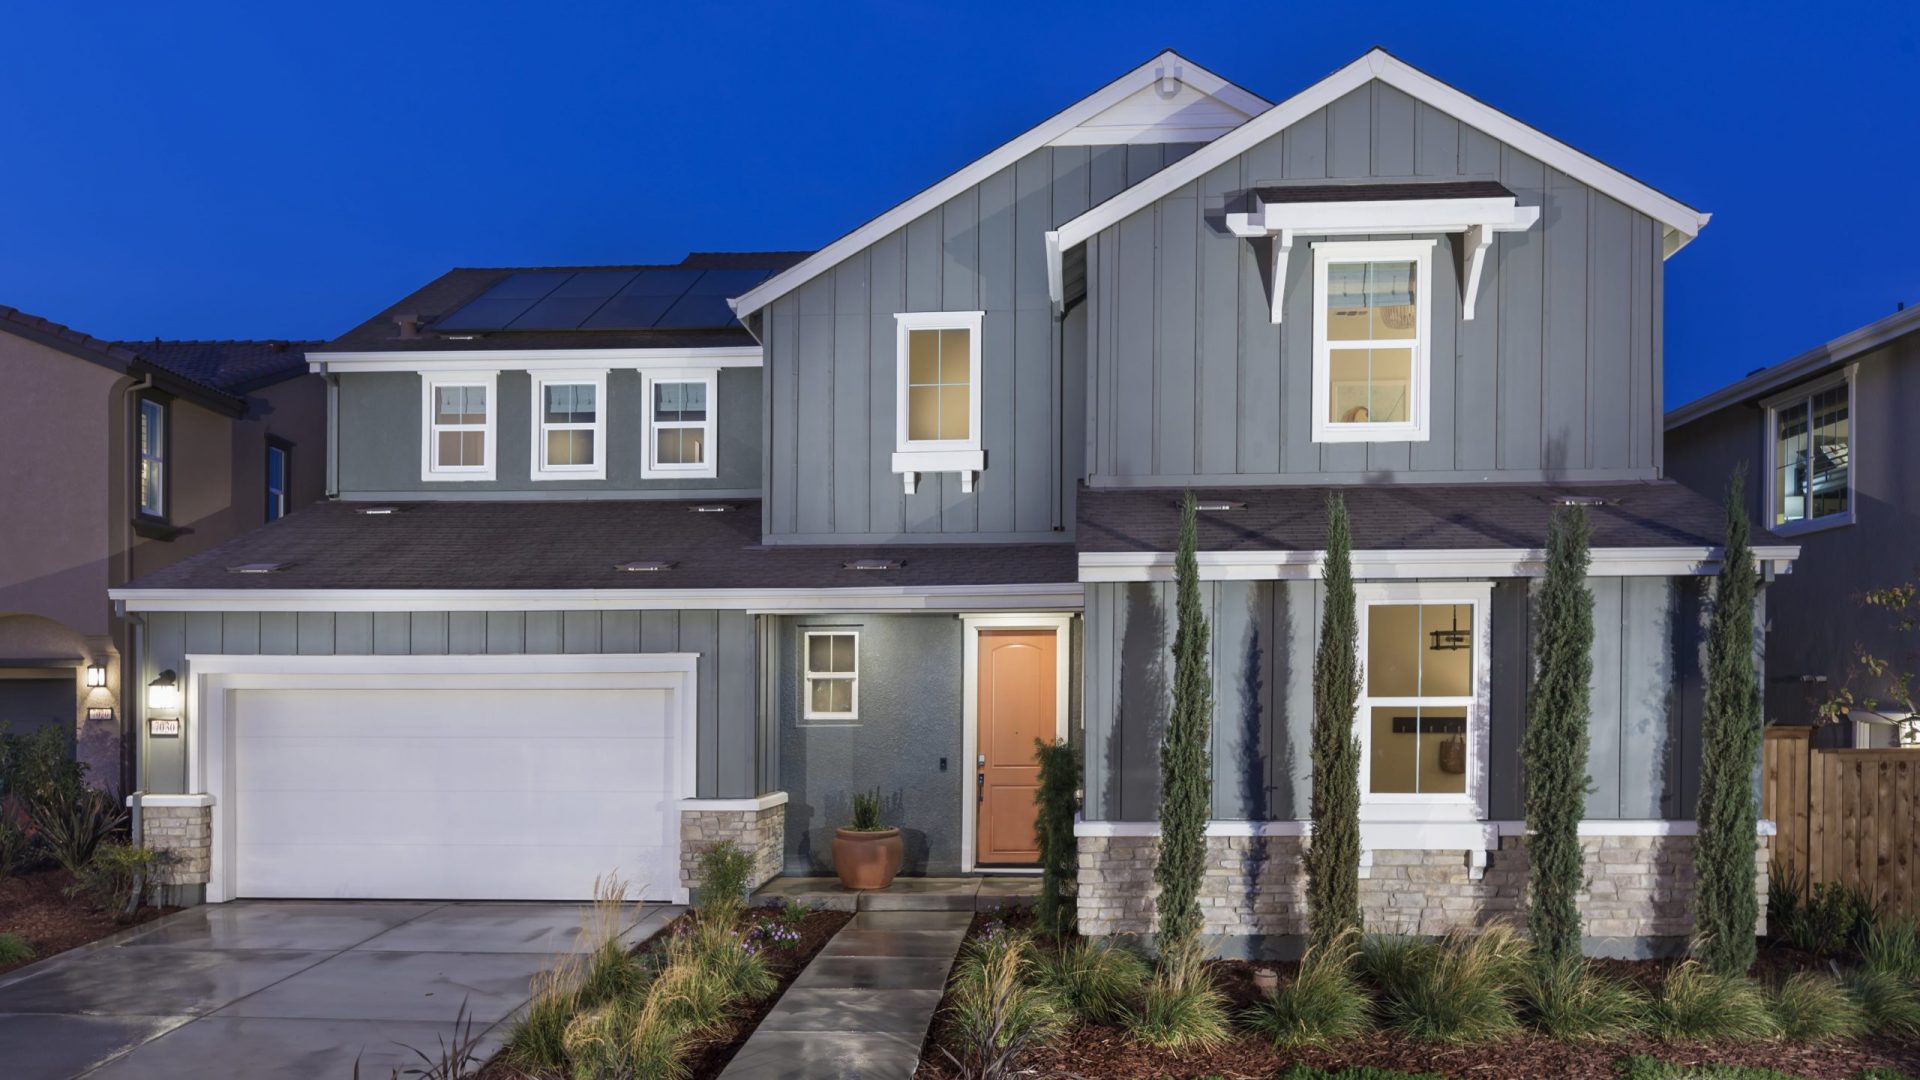 Lennar Private self-tours in the Bay Area